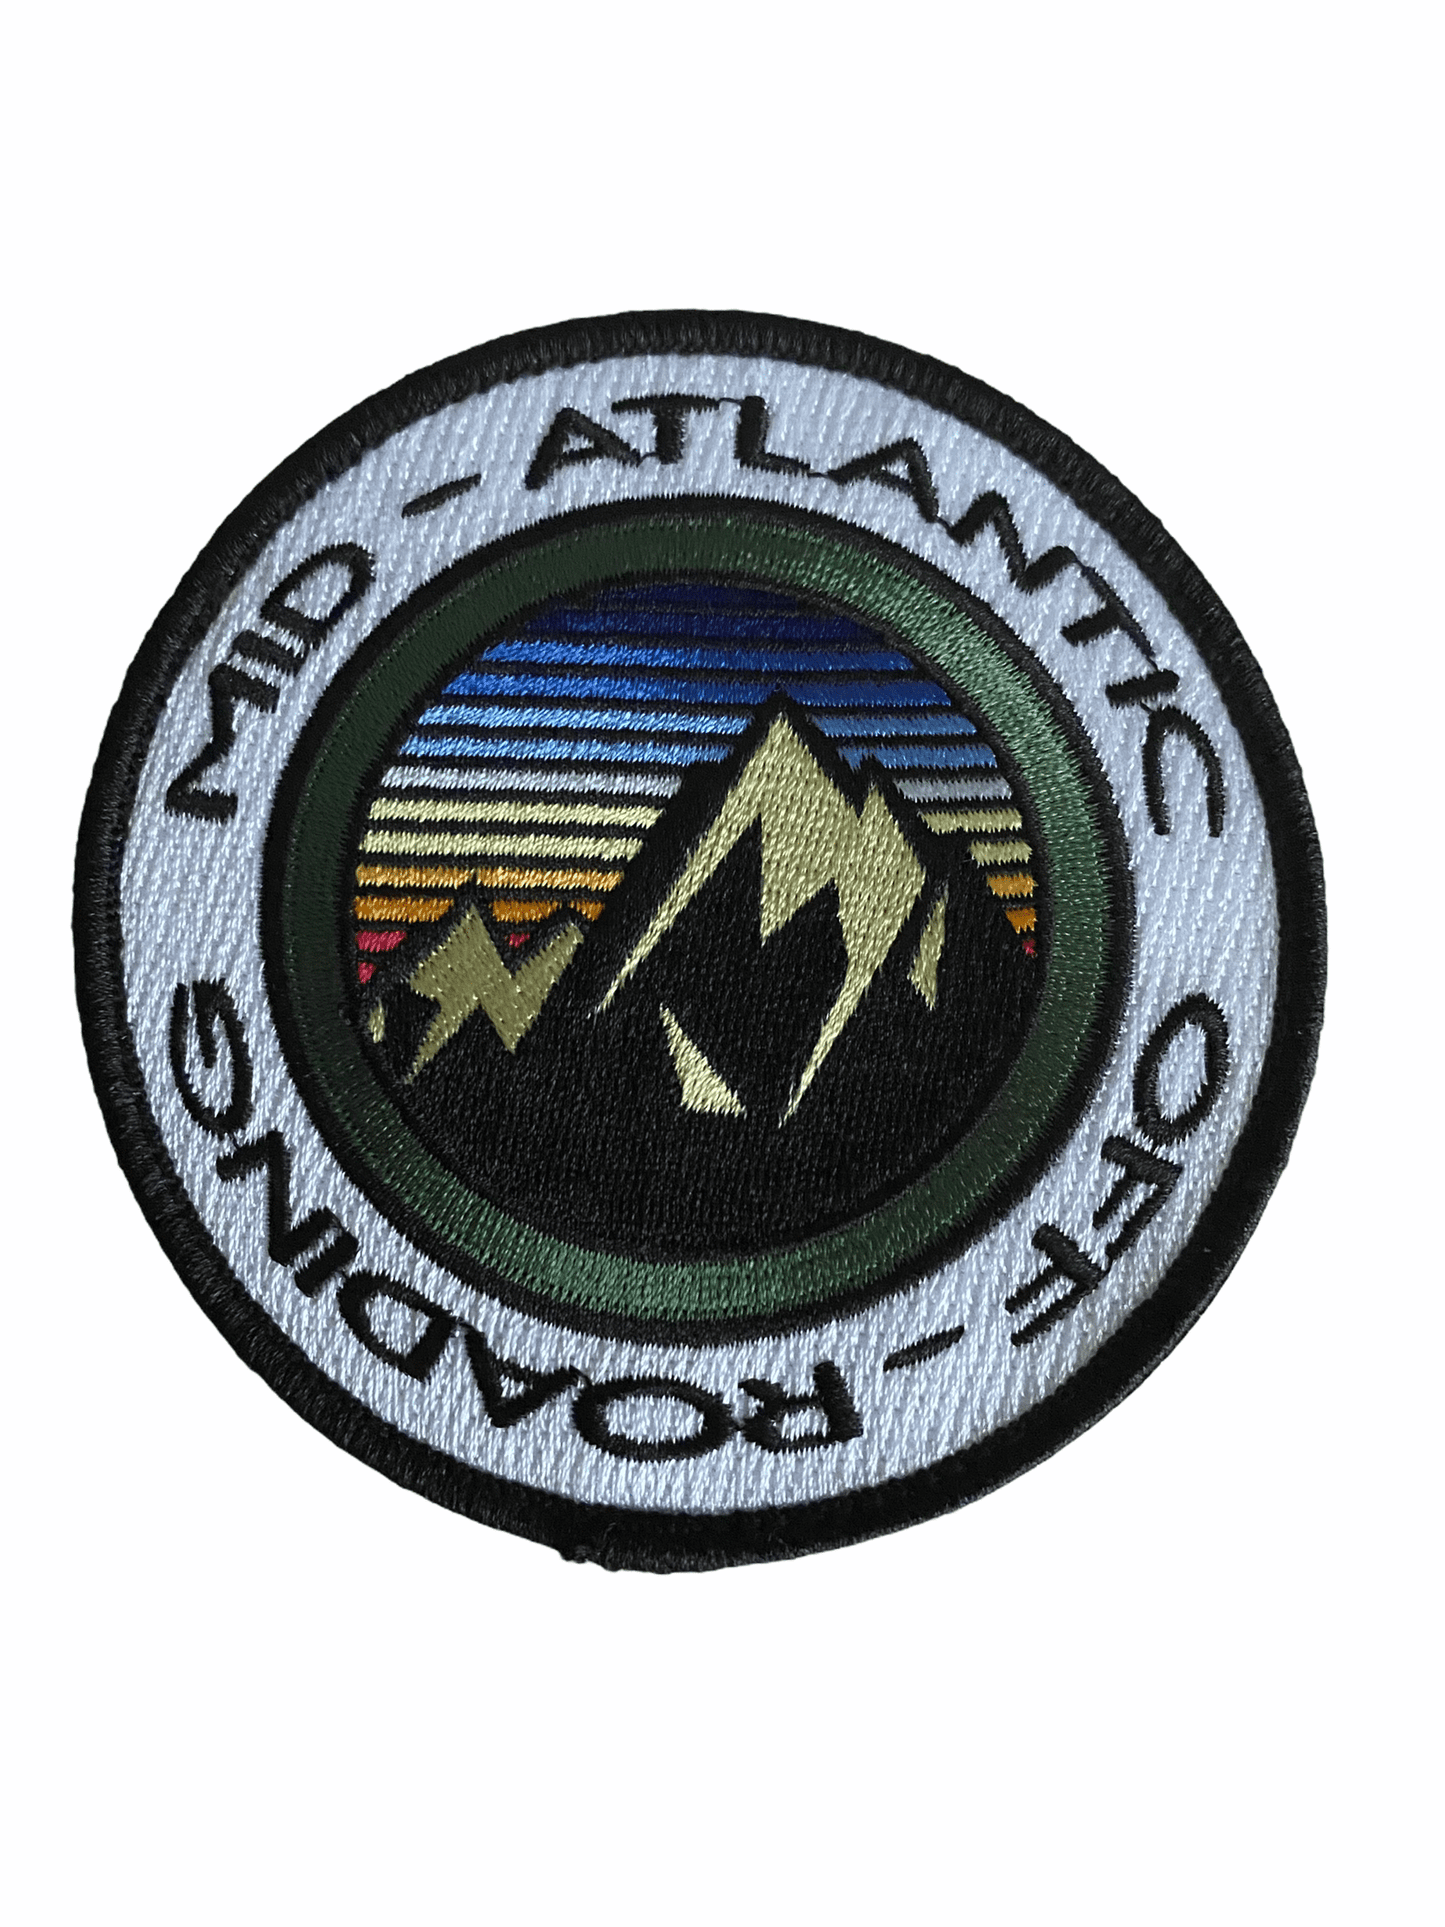 Mid-Atlantic Off-Roading Official Patch - Mid-Atlantic Off-Roading